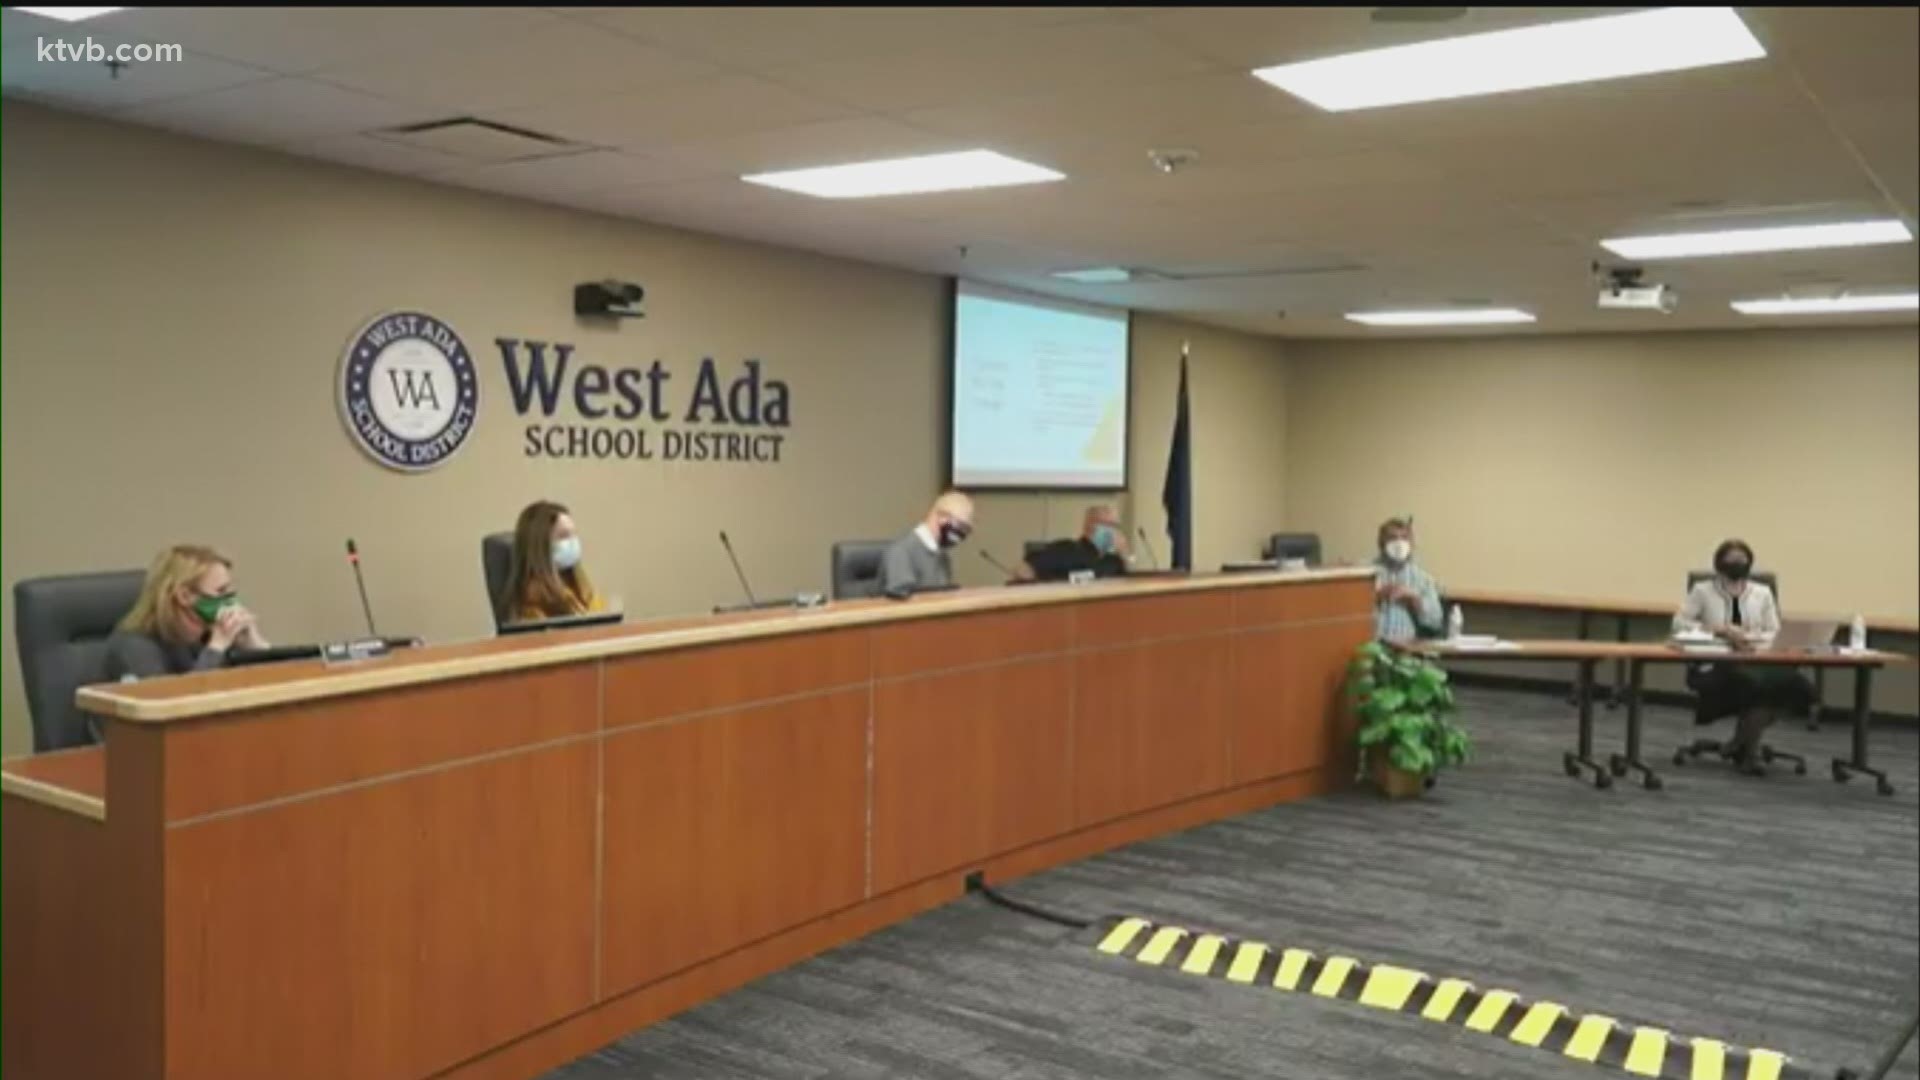 The school board did not pass a motion to make any major changes to the plan, but did create work group to "improve plan-making for remote learning."